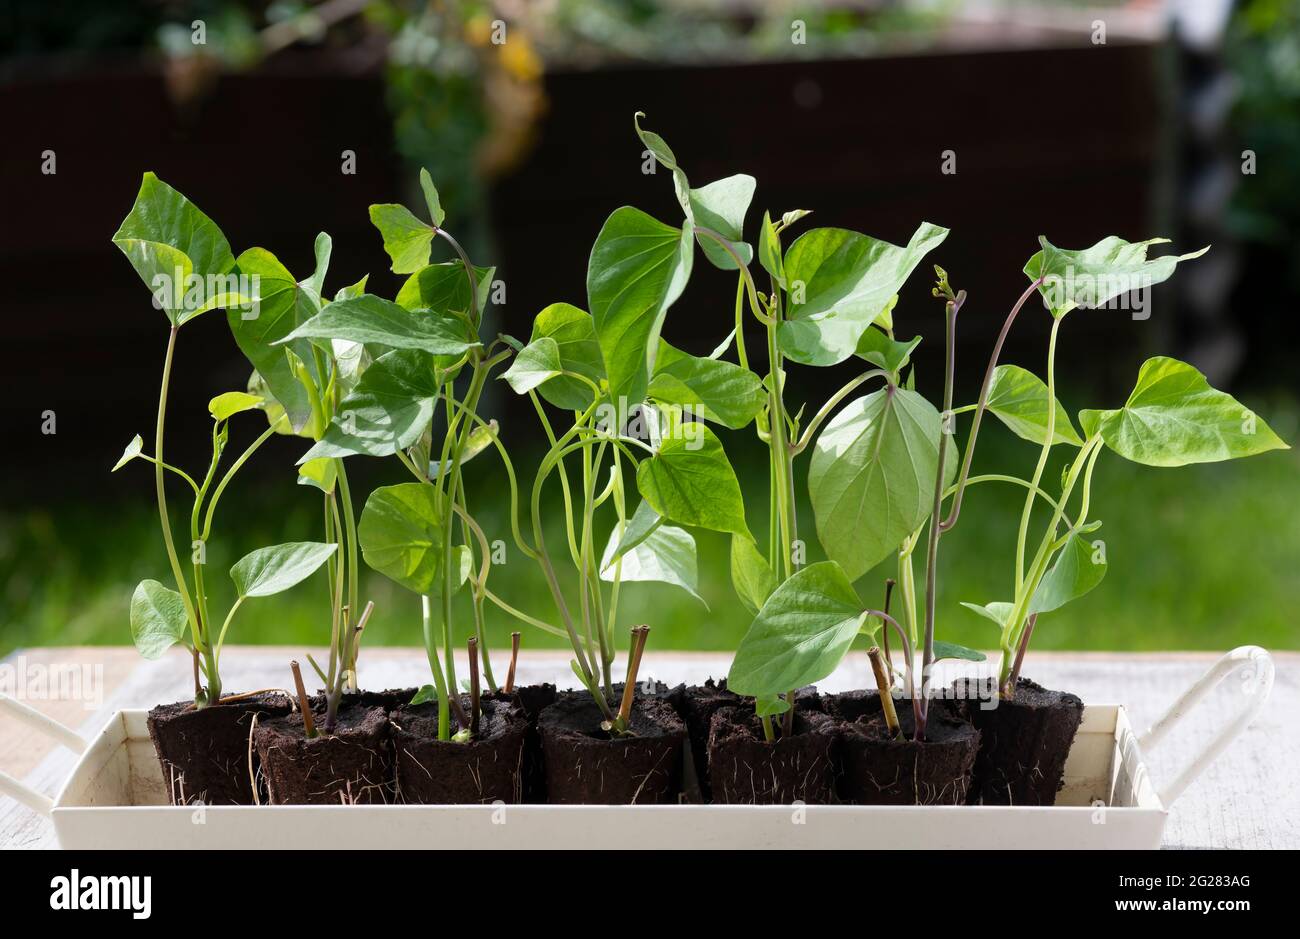 a group of  rooted sprouting sweet potato slips, a dicotyledonous plant Convolvulaceae related to the bindweed or morning glory family, gardening back Stock Photo